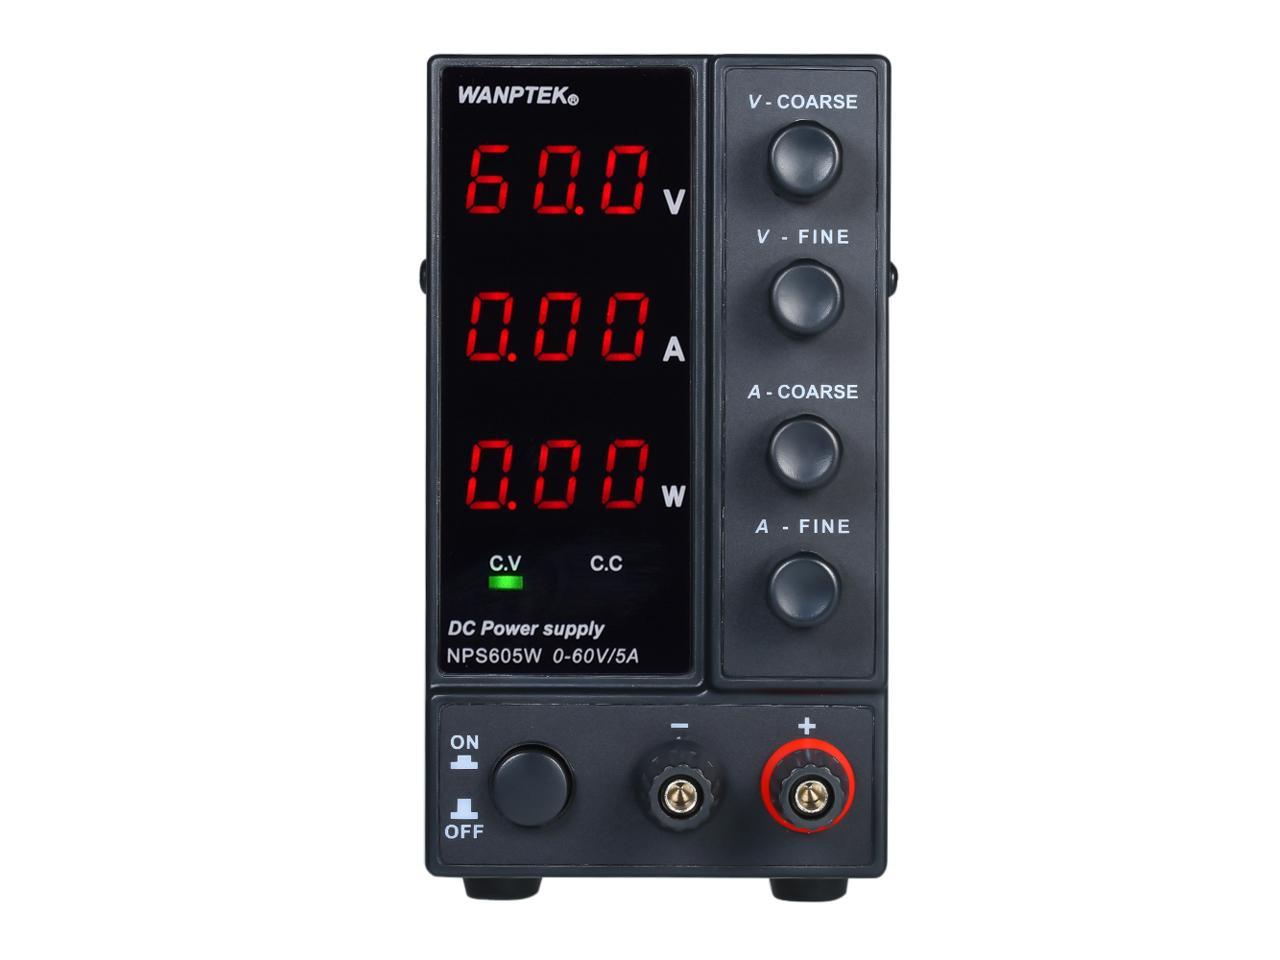 WANPTEK NPS605W 0-60V 0-5A Switching DC Power Supply 3 Digits Display LED High Precision Adjustable Mini Power Supply AC 115V/230V 50/60Hz Voltage & Current Regulated Dual Output